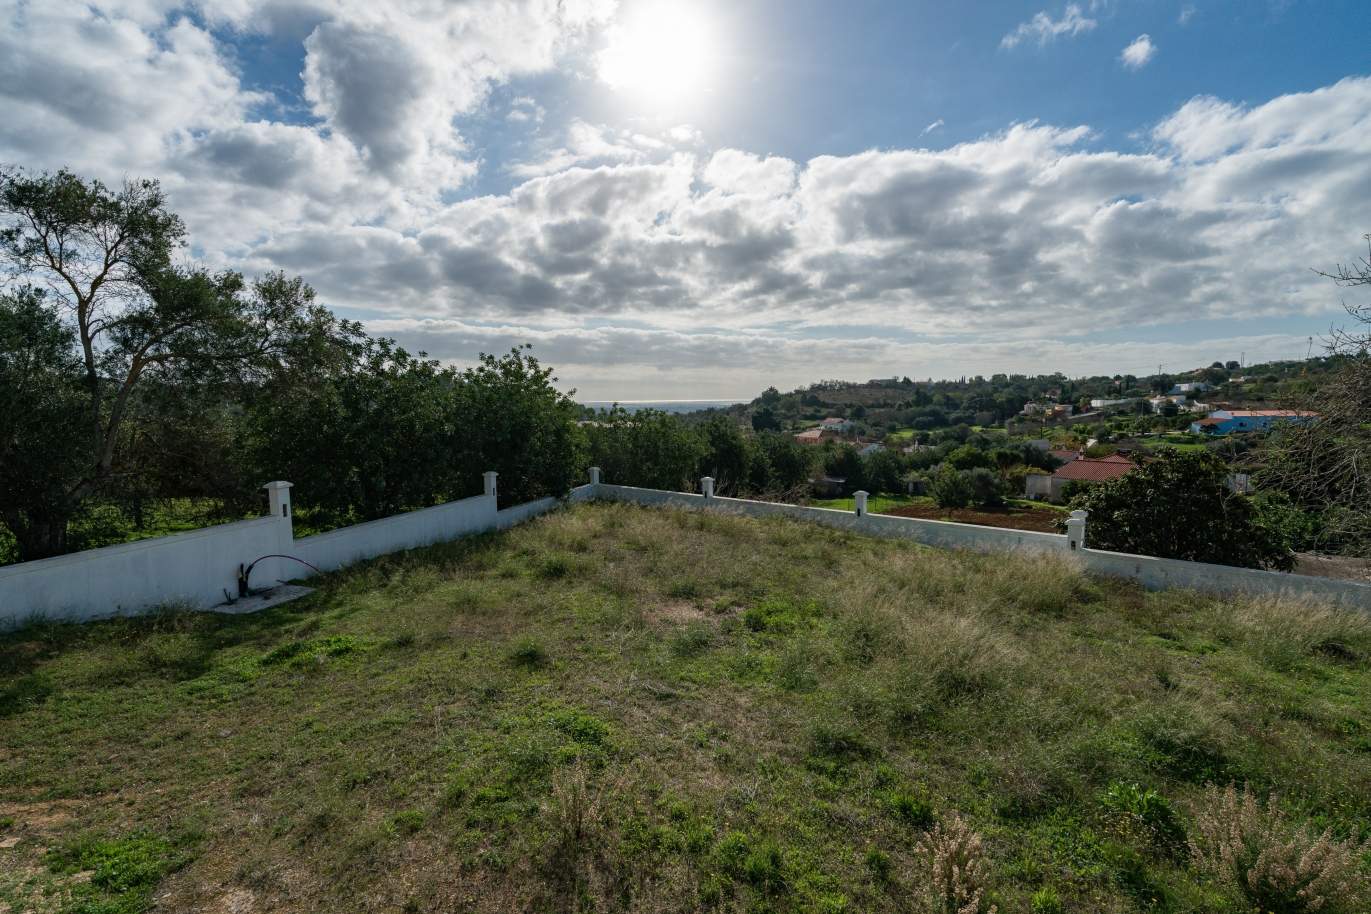 4 bedrooms Villa, under construction, with mountain and sea view, near Boliqueime, Algarve_157017